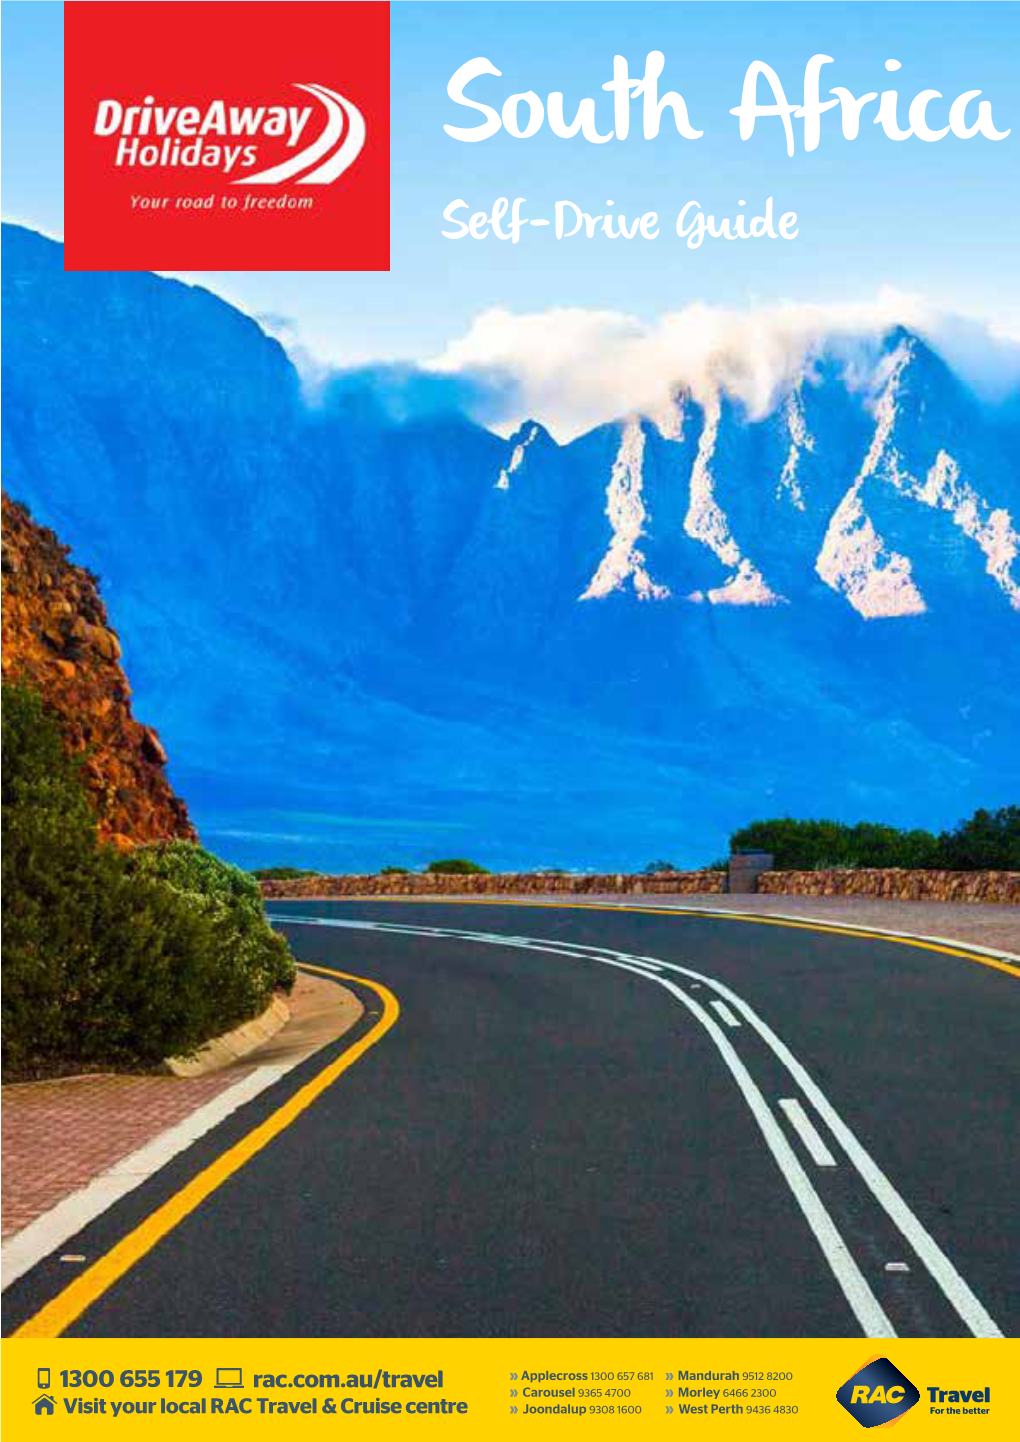 South Africa Self-Drive Guide